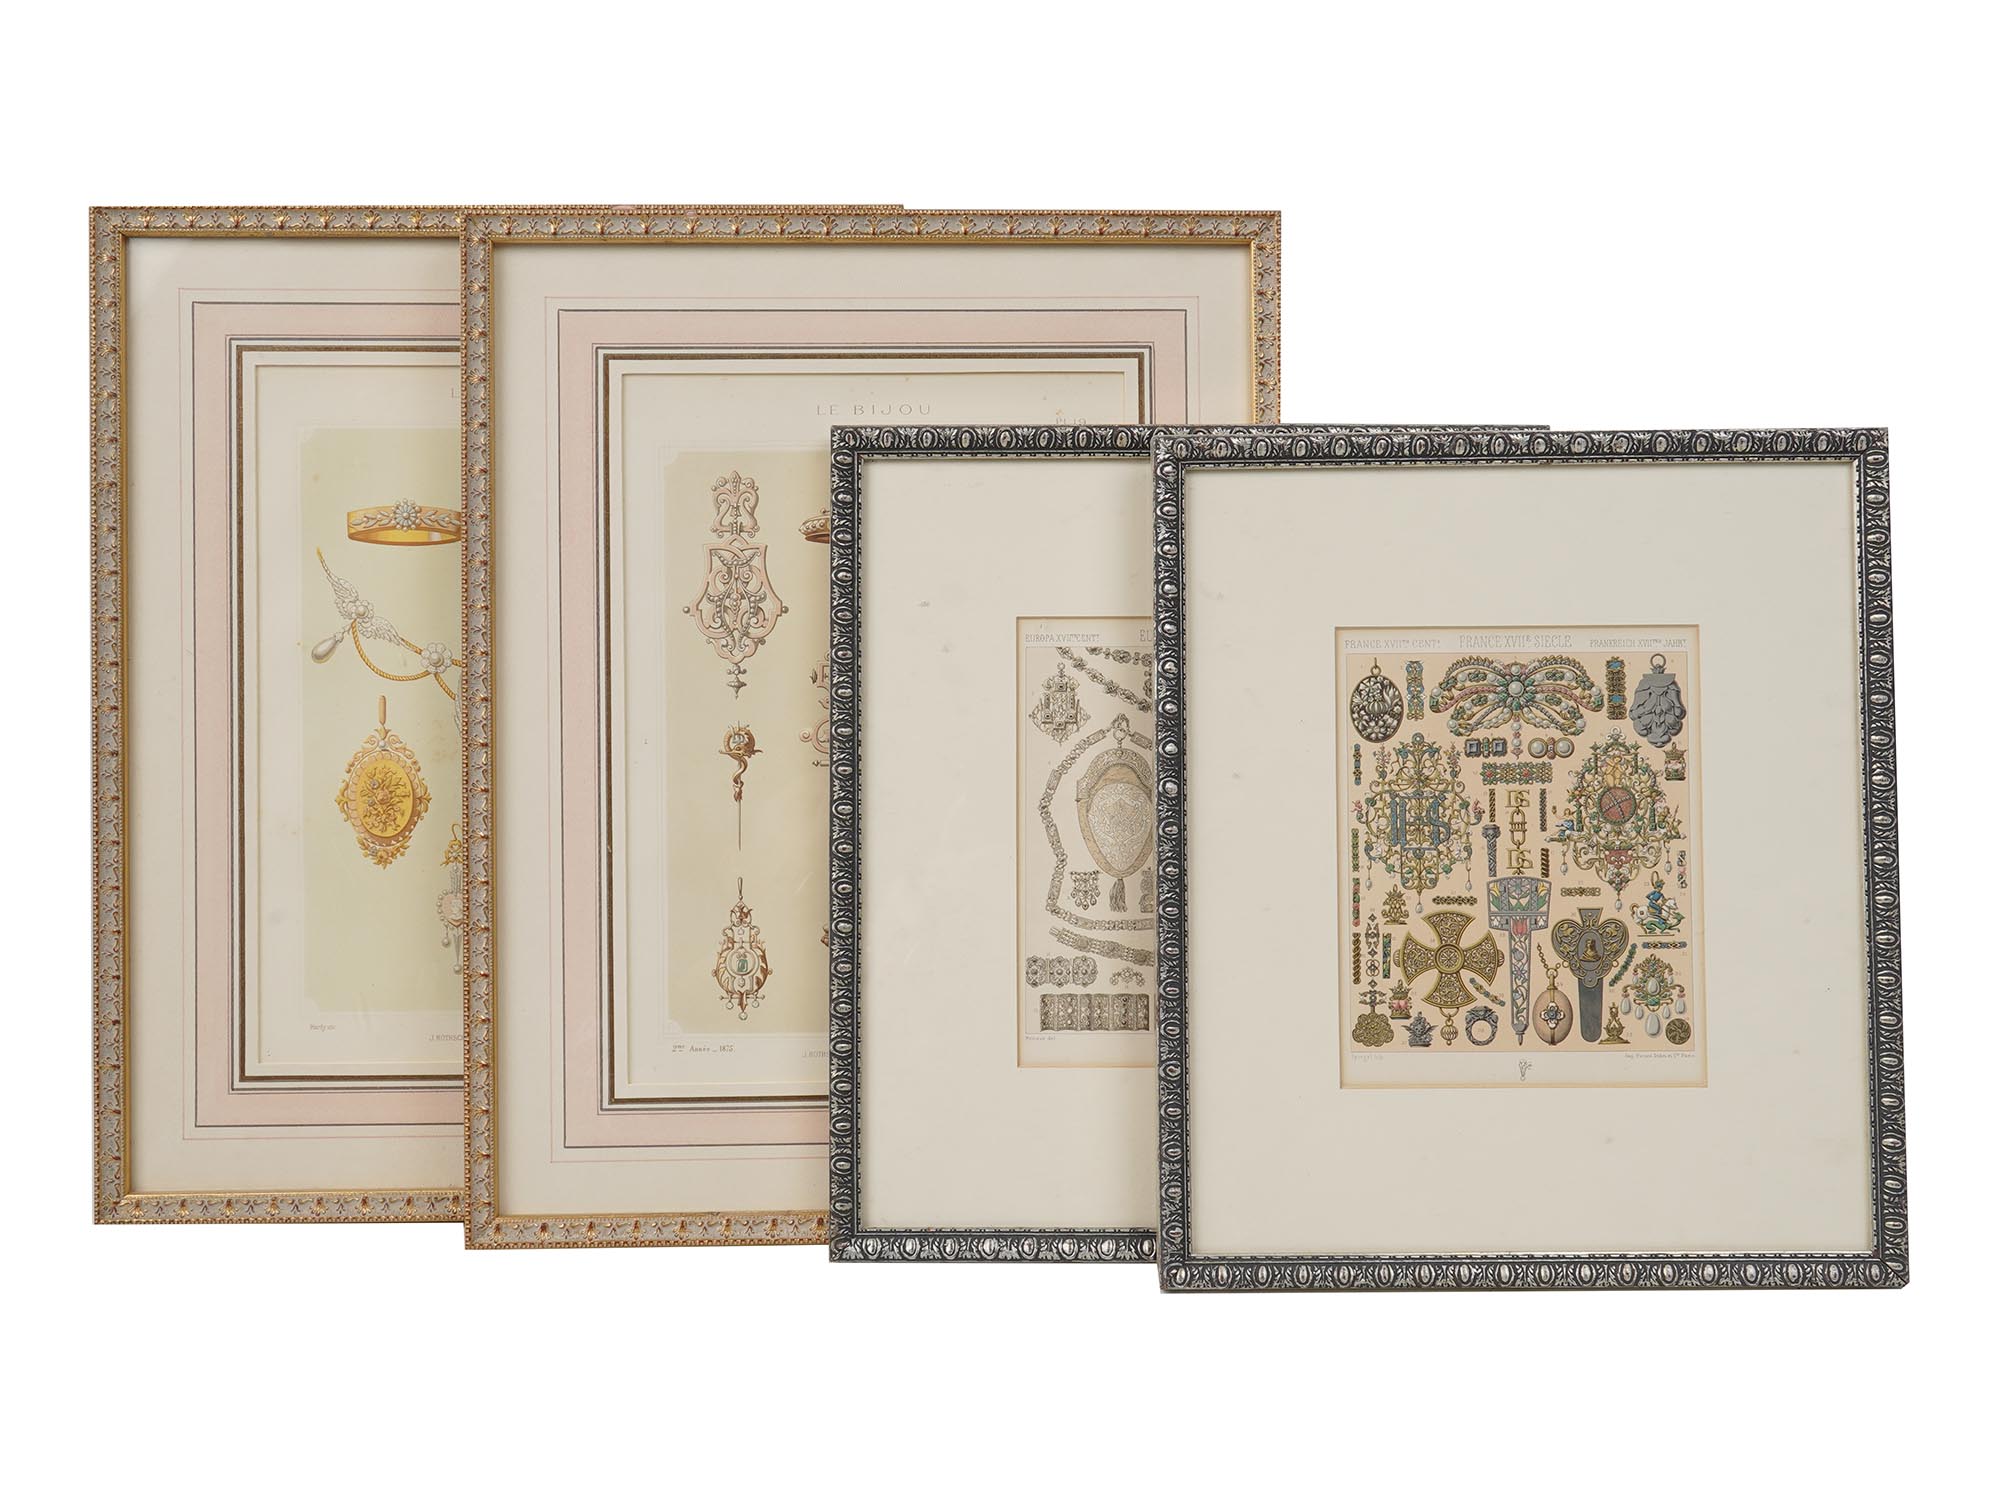 FOUR ANTIQUE FRAMED FRENCH JEWELRY DESIGNS PRINTS